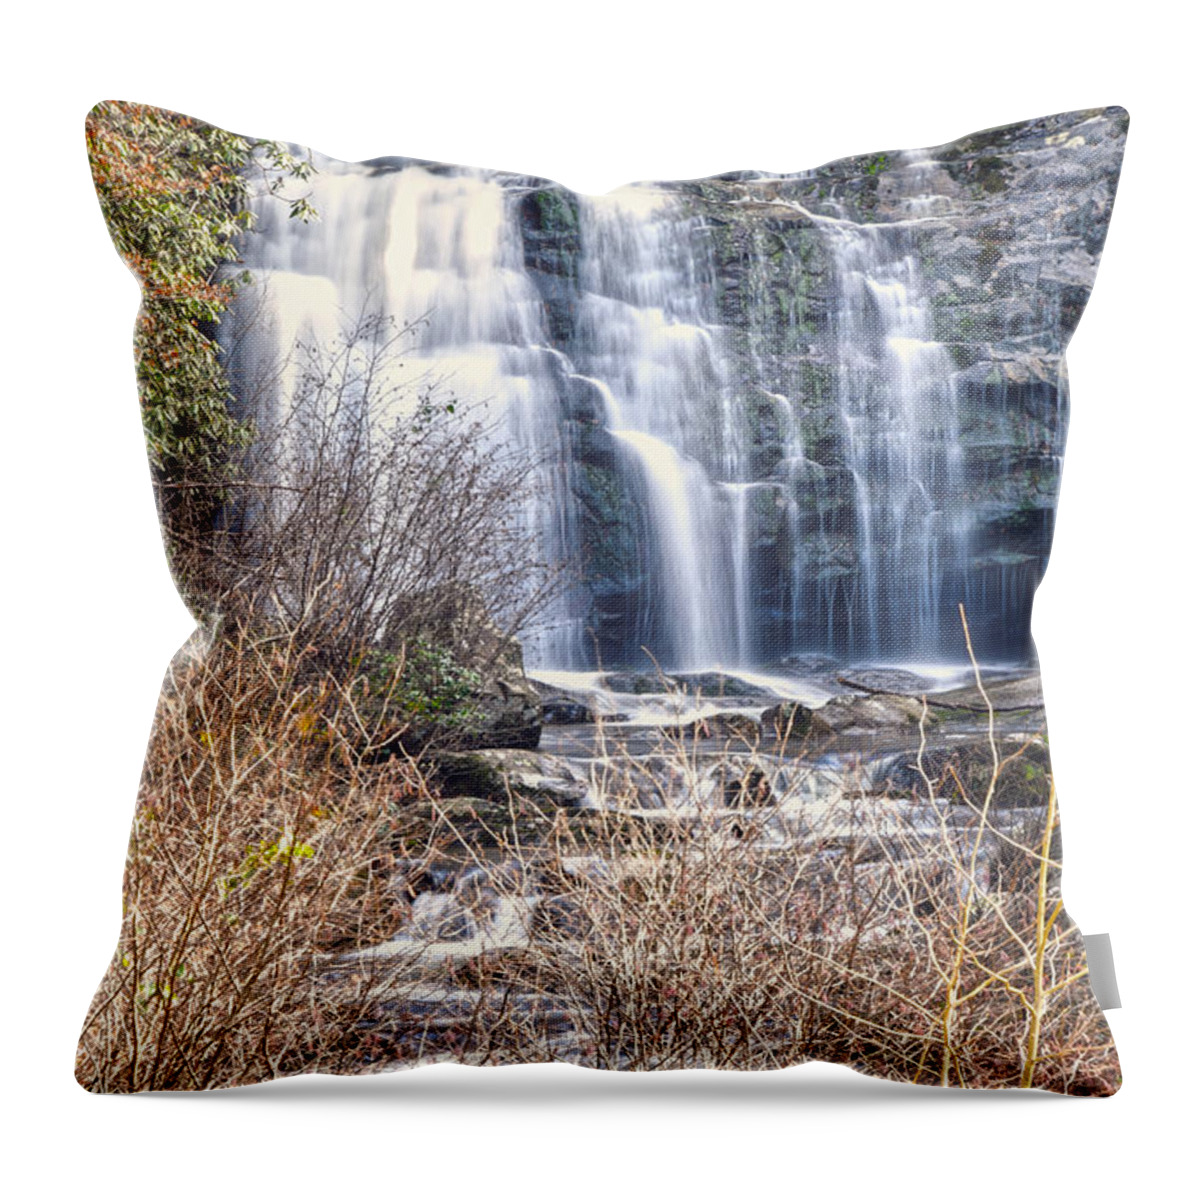 Meigs Falls Throw Pillow featuring the photograph Meigs Falls 7 by Phil Perkins